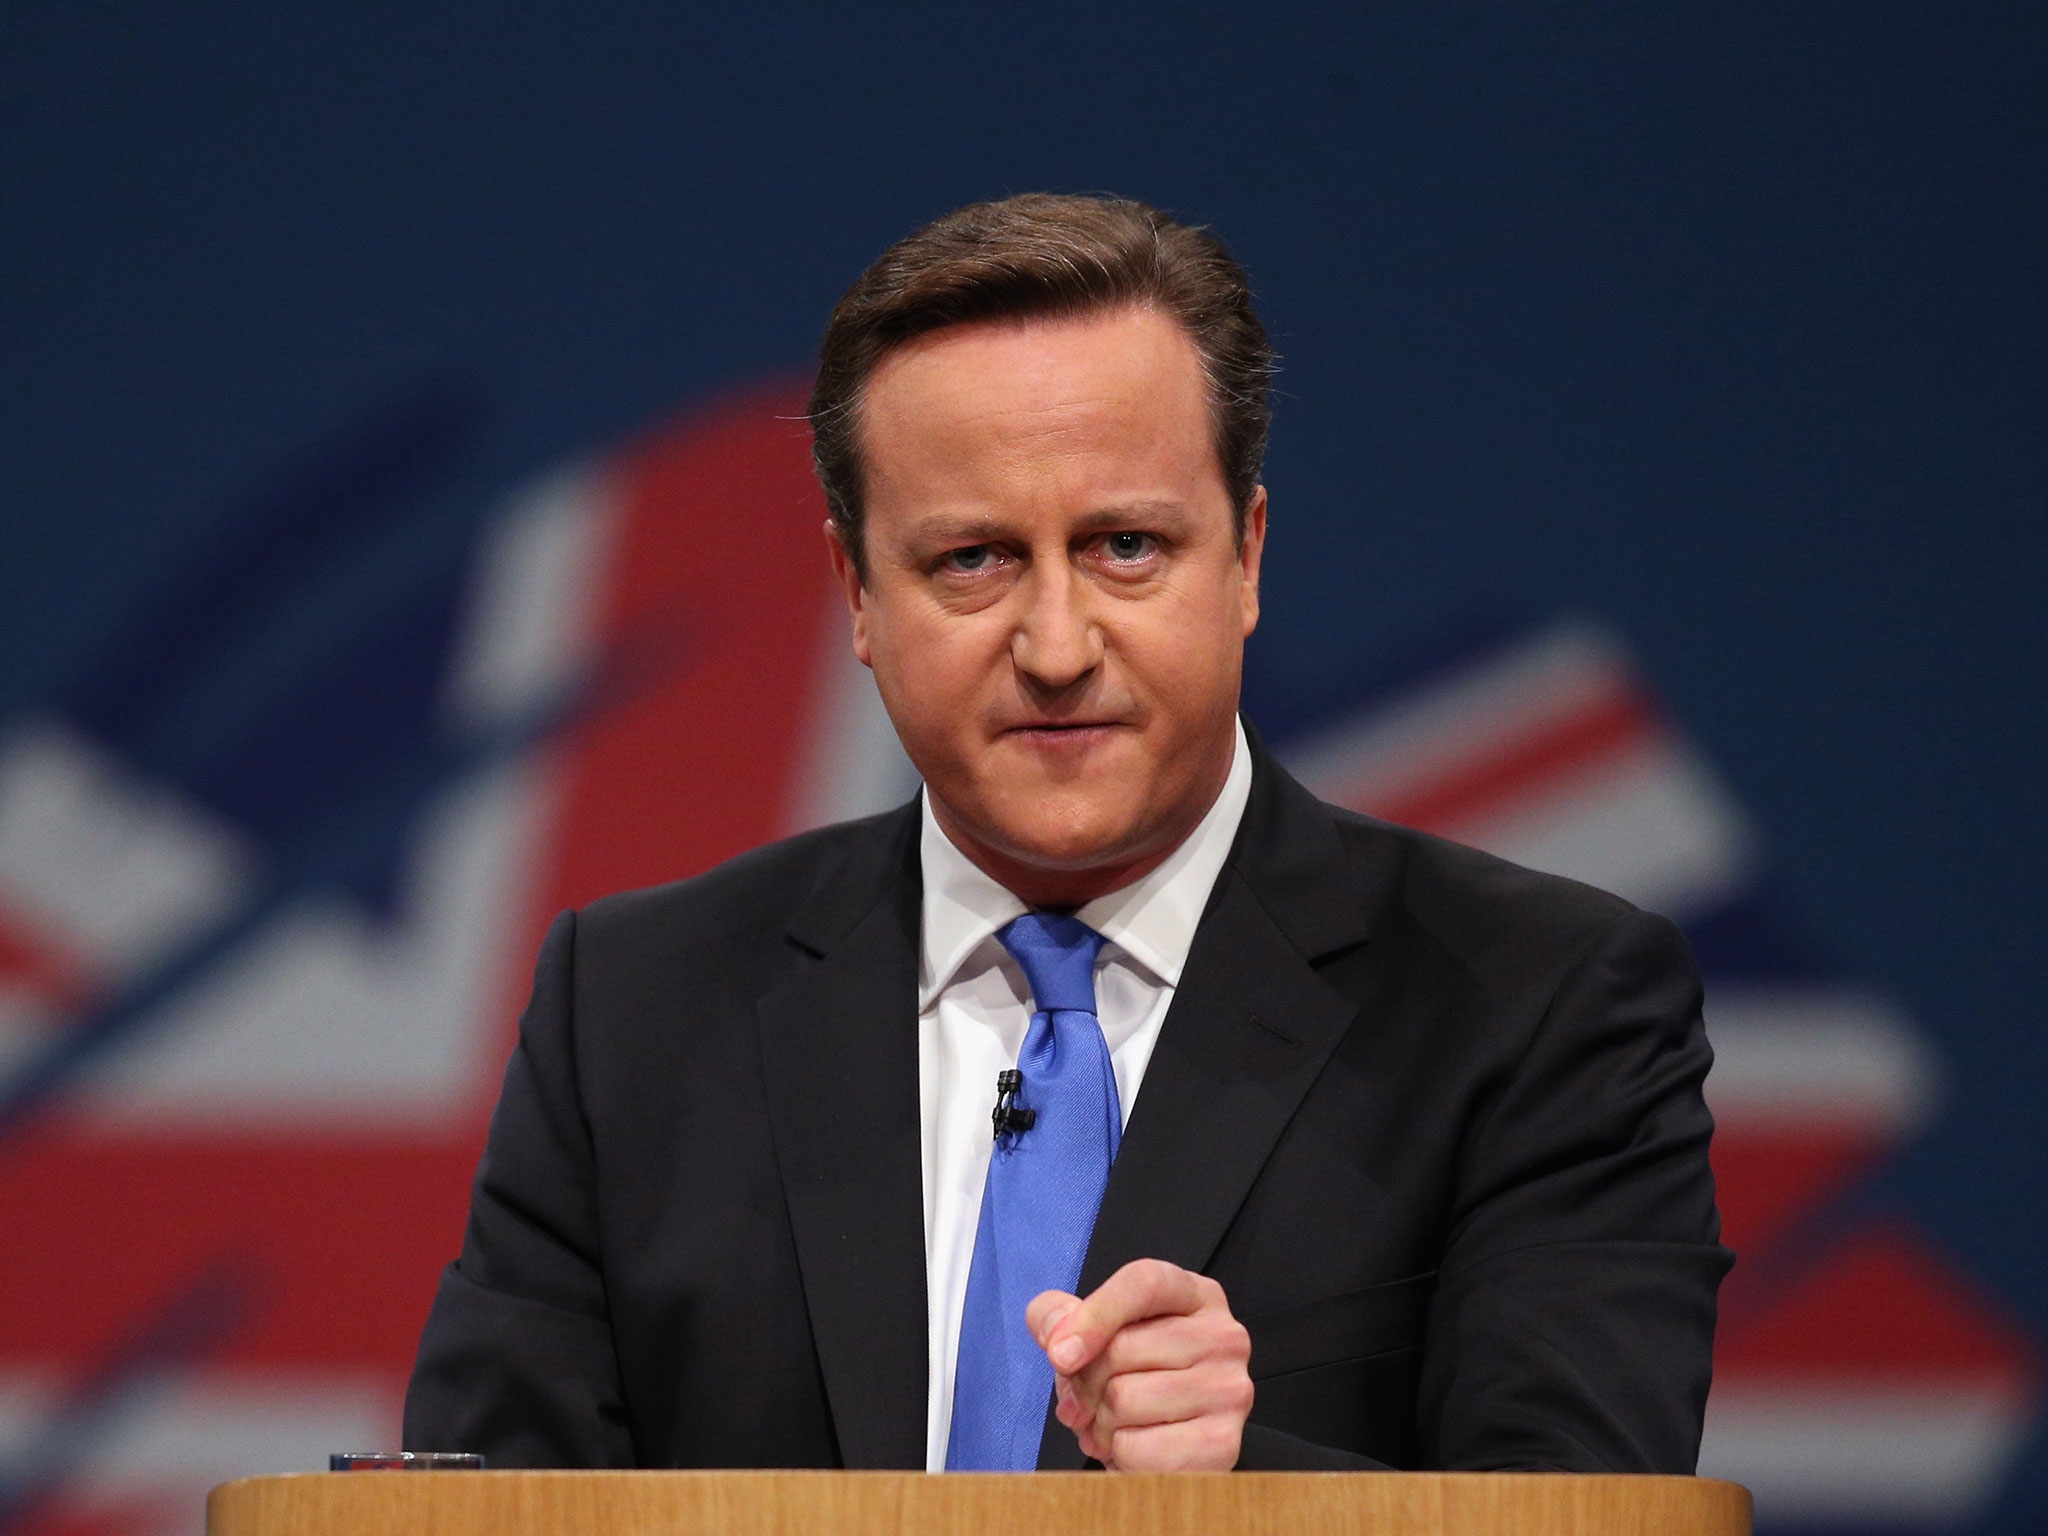 David Cameron resigns after UK votes to leave European Union YFM Ghana